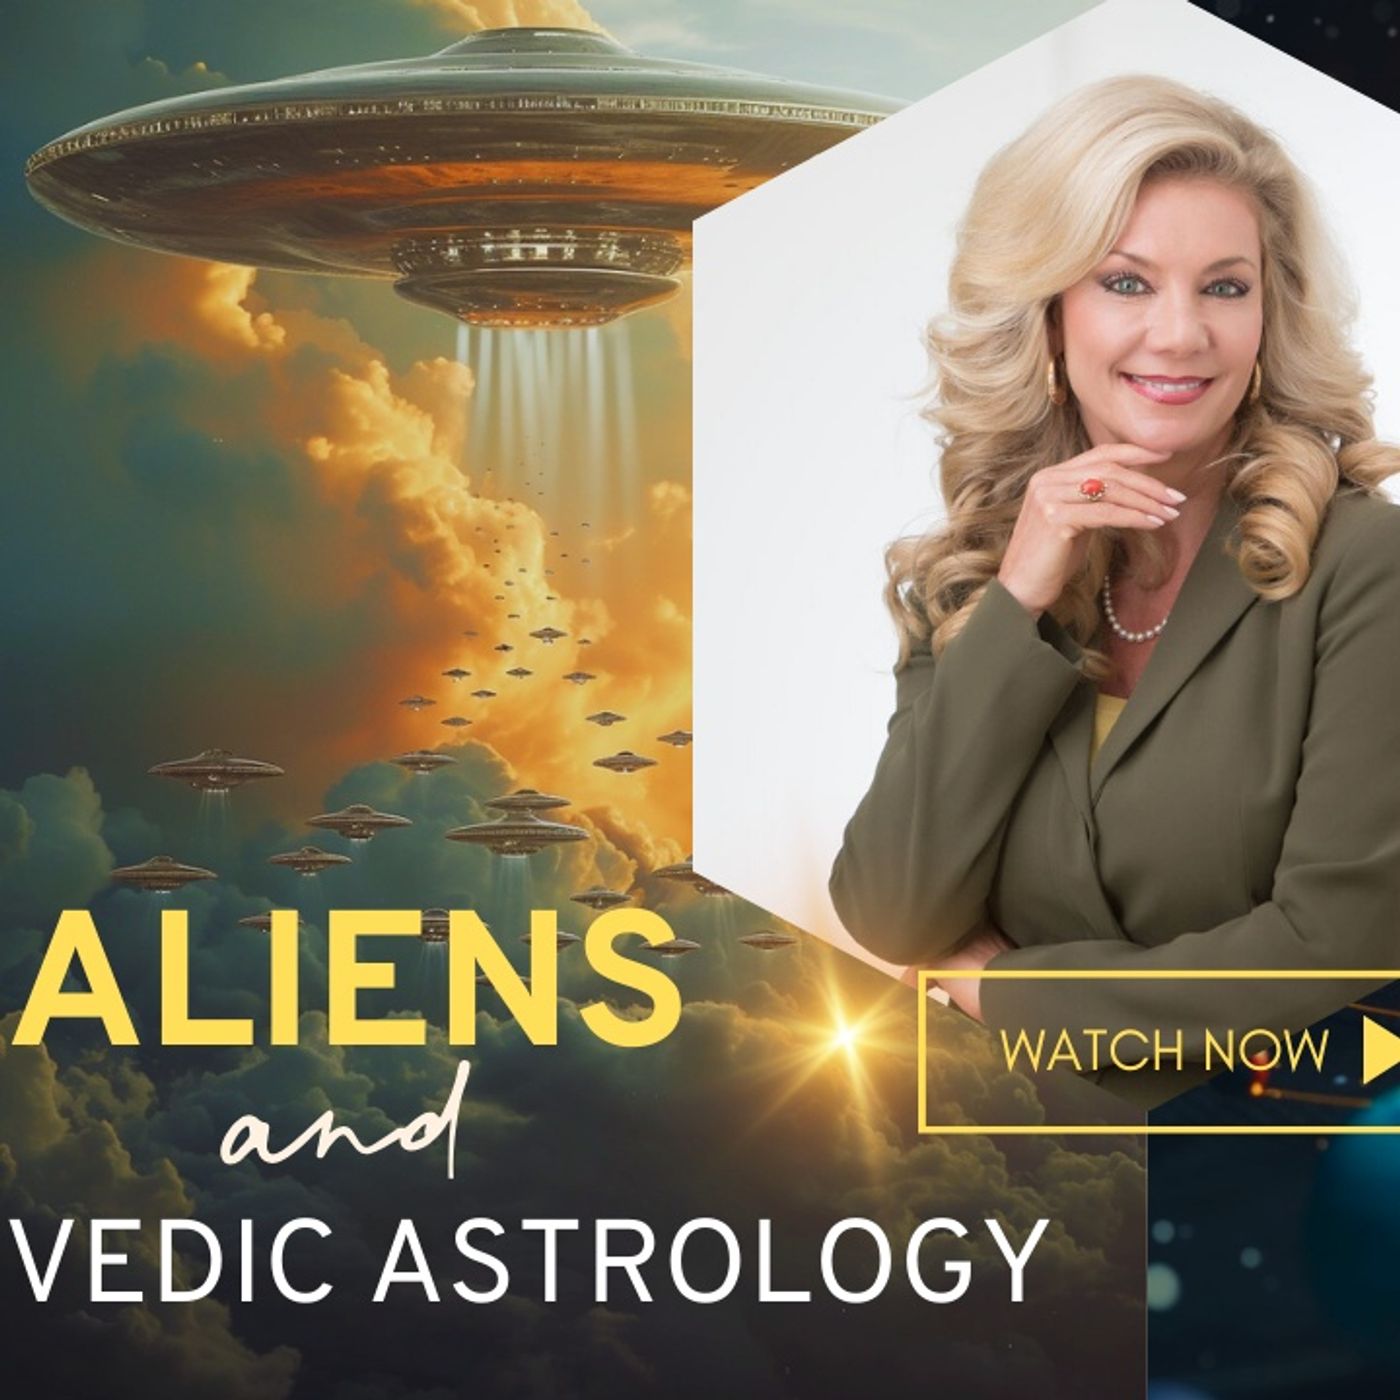 The Aliens Are Coming! Predictions from Vedic Astrologer Joni Patry